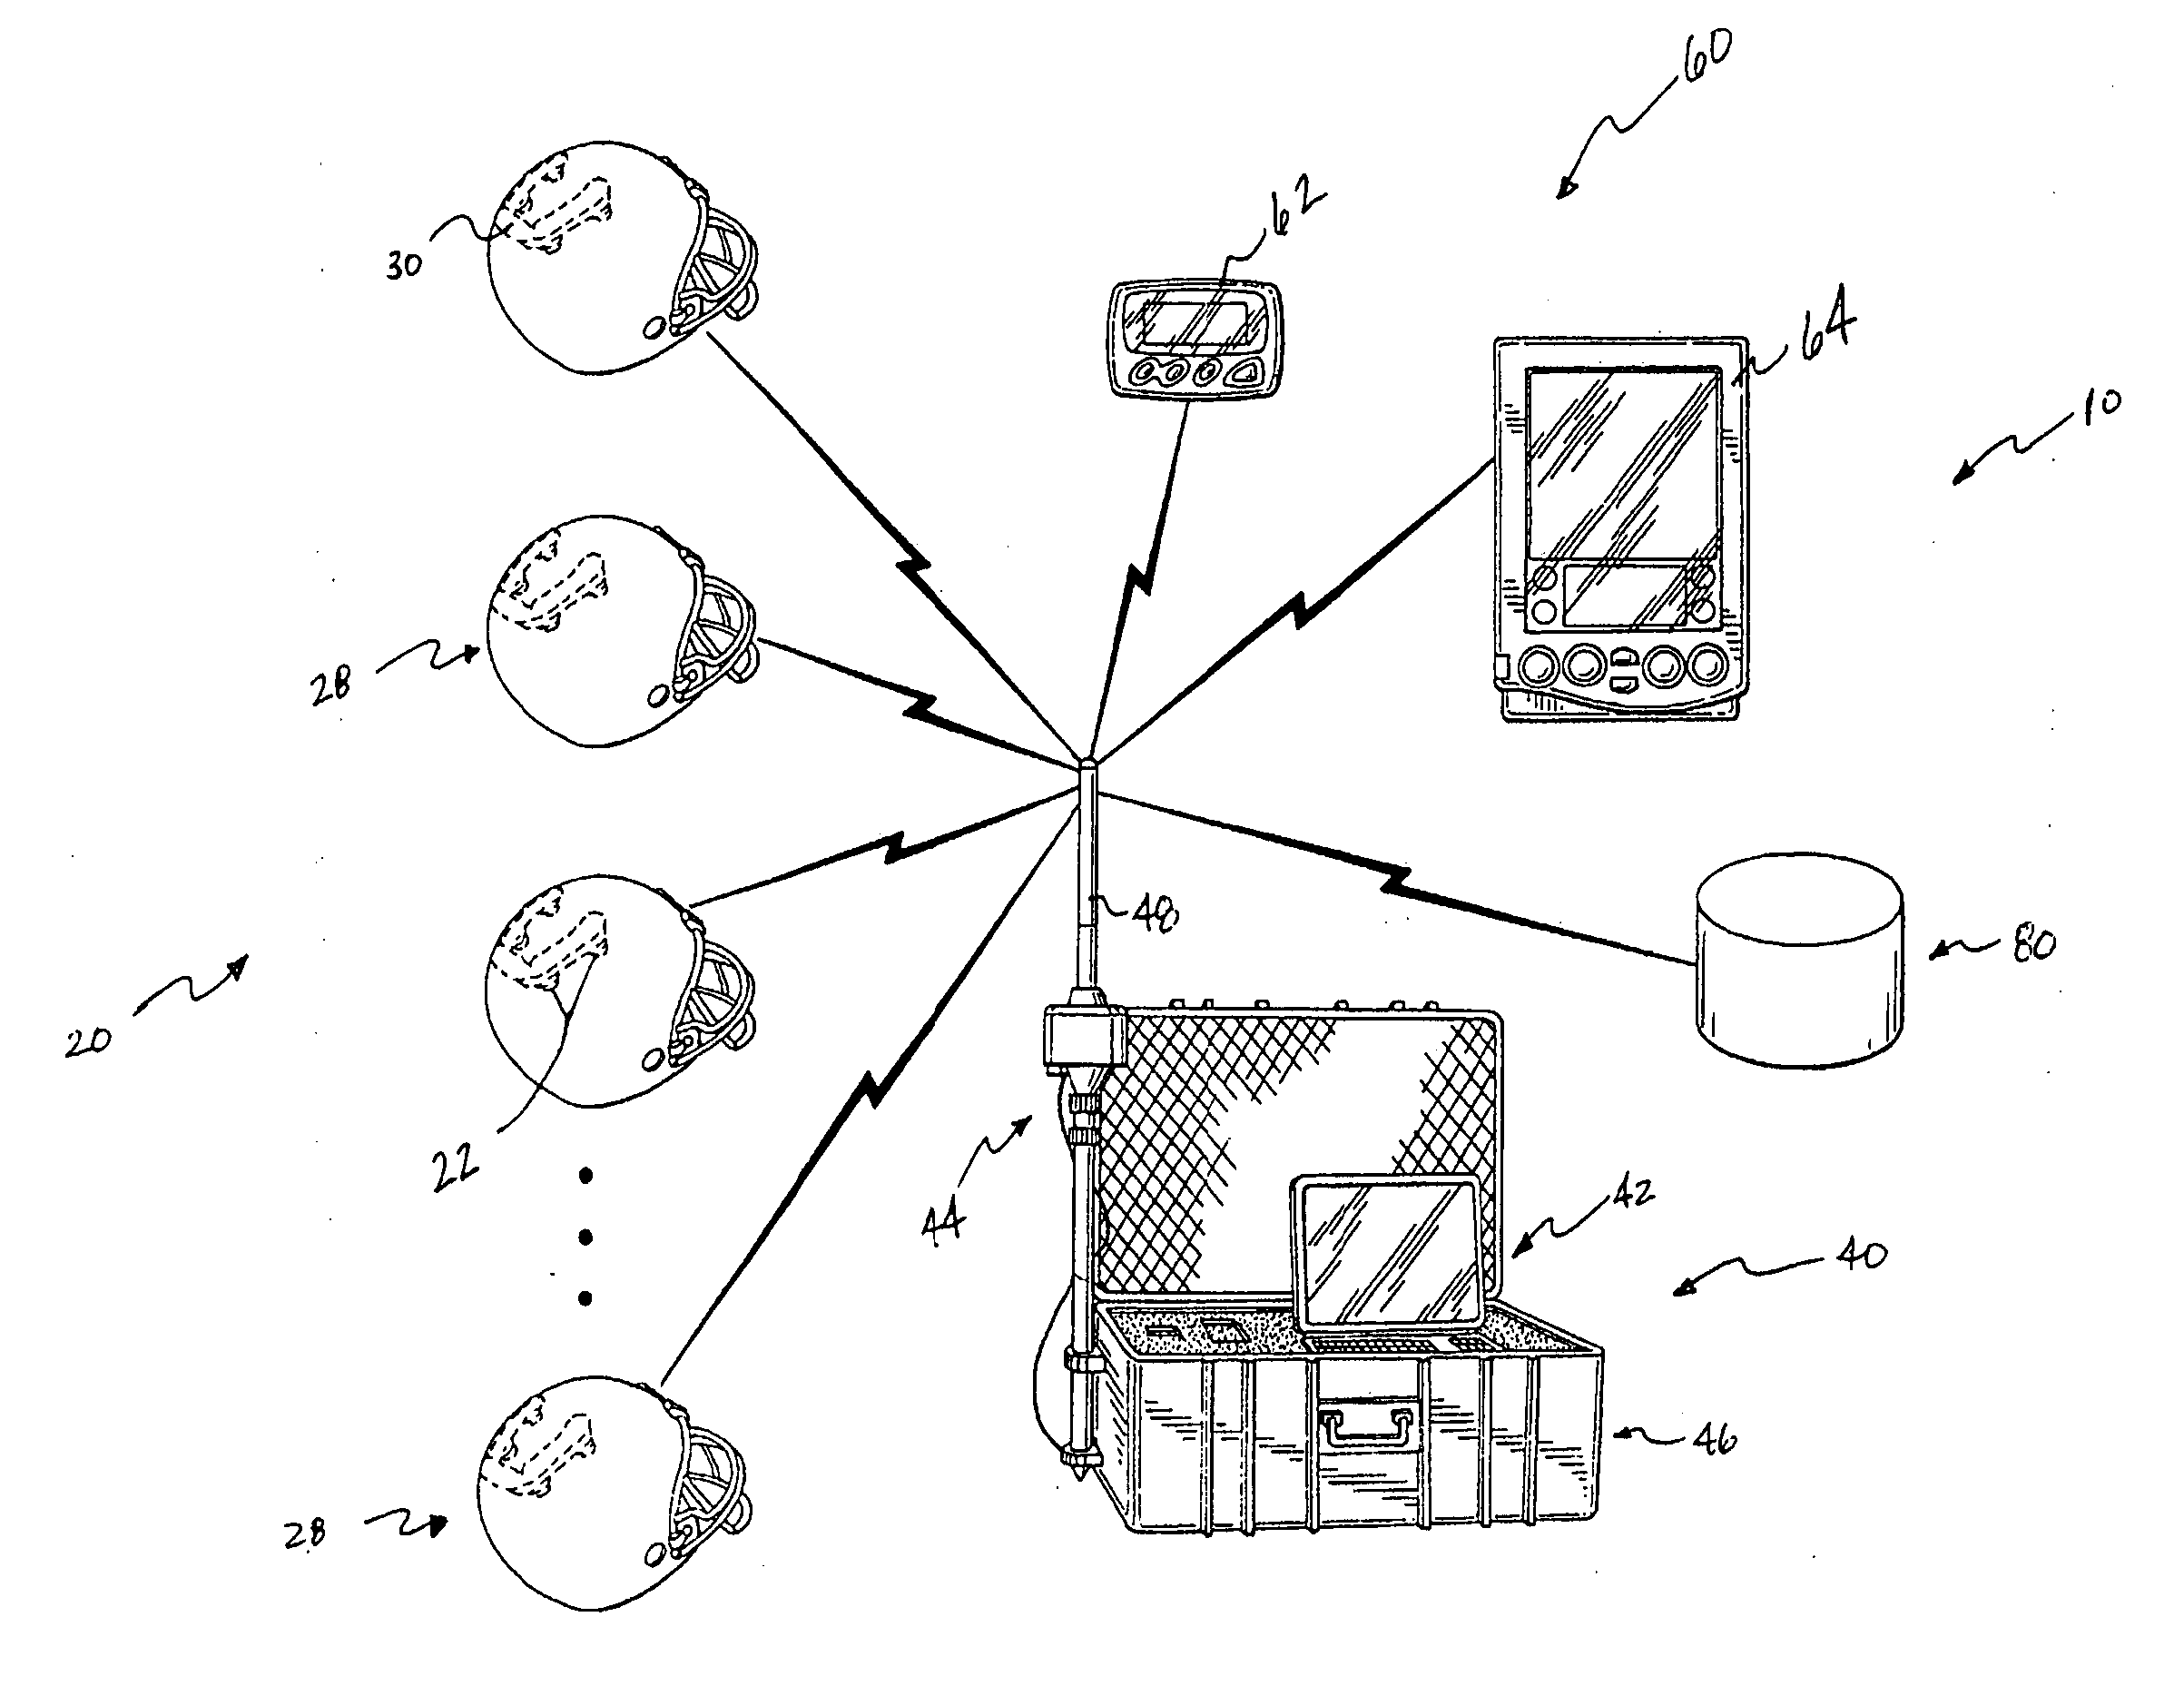 System and method for evaluating and providing treatment to sports participants